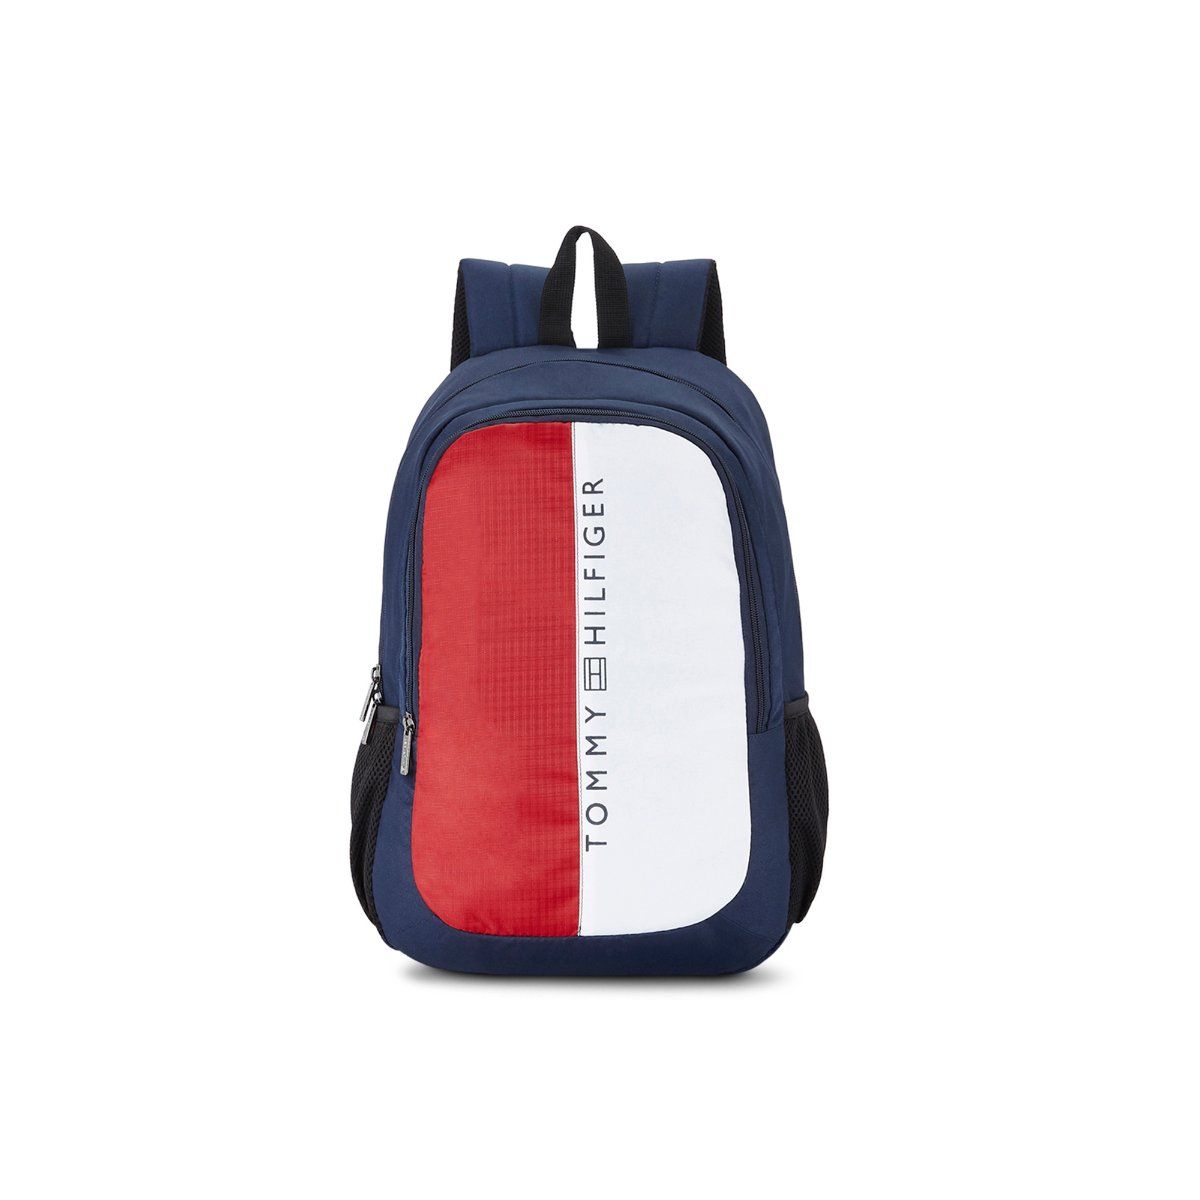 buy tommy hilfiger bags online